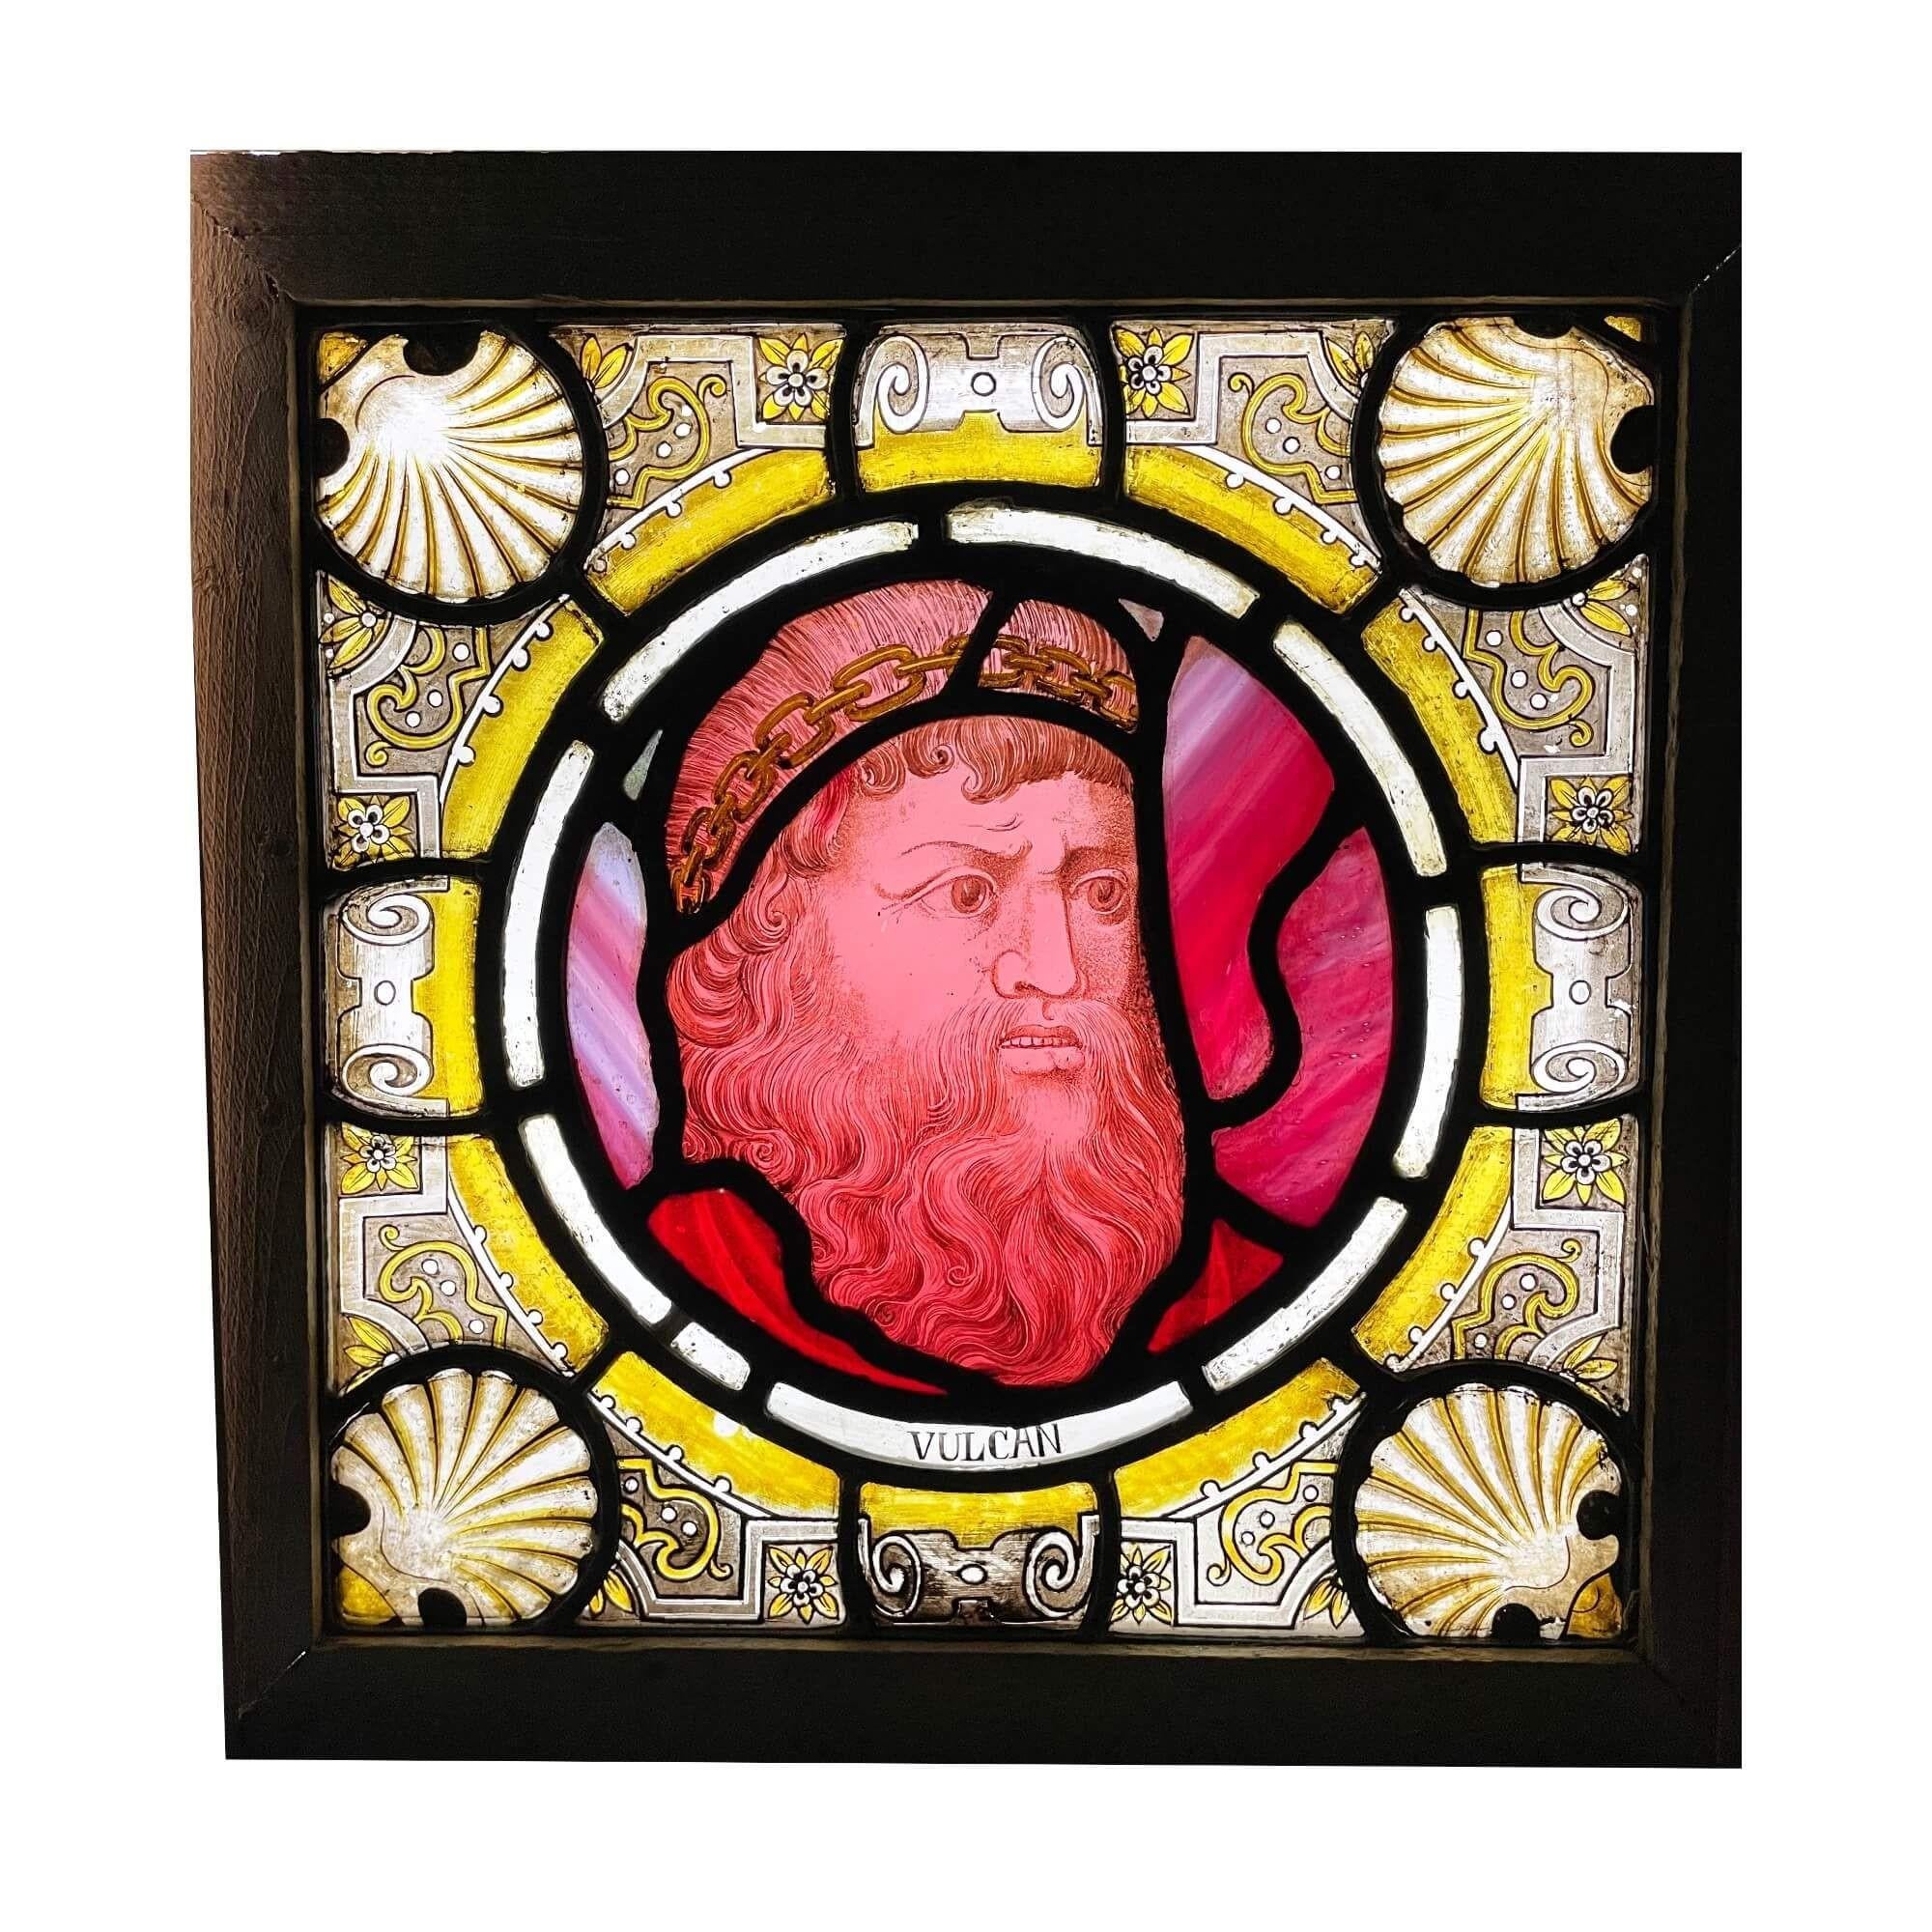 A late 19th century antique stained glass window panel depicting Vulcan, God of fire and the forge, one of 3 similar we are selling depicting notable figures of Greek and Roman mythology.

This vibrant piece was previously owned by Seymour Stein -